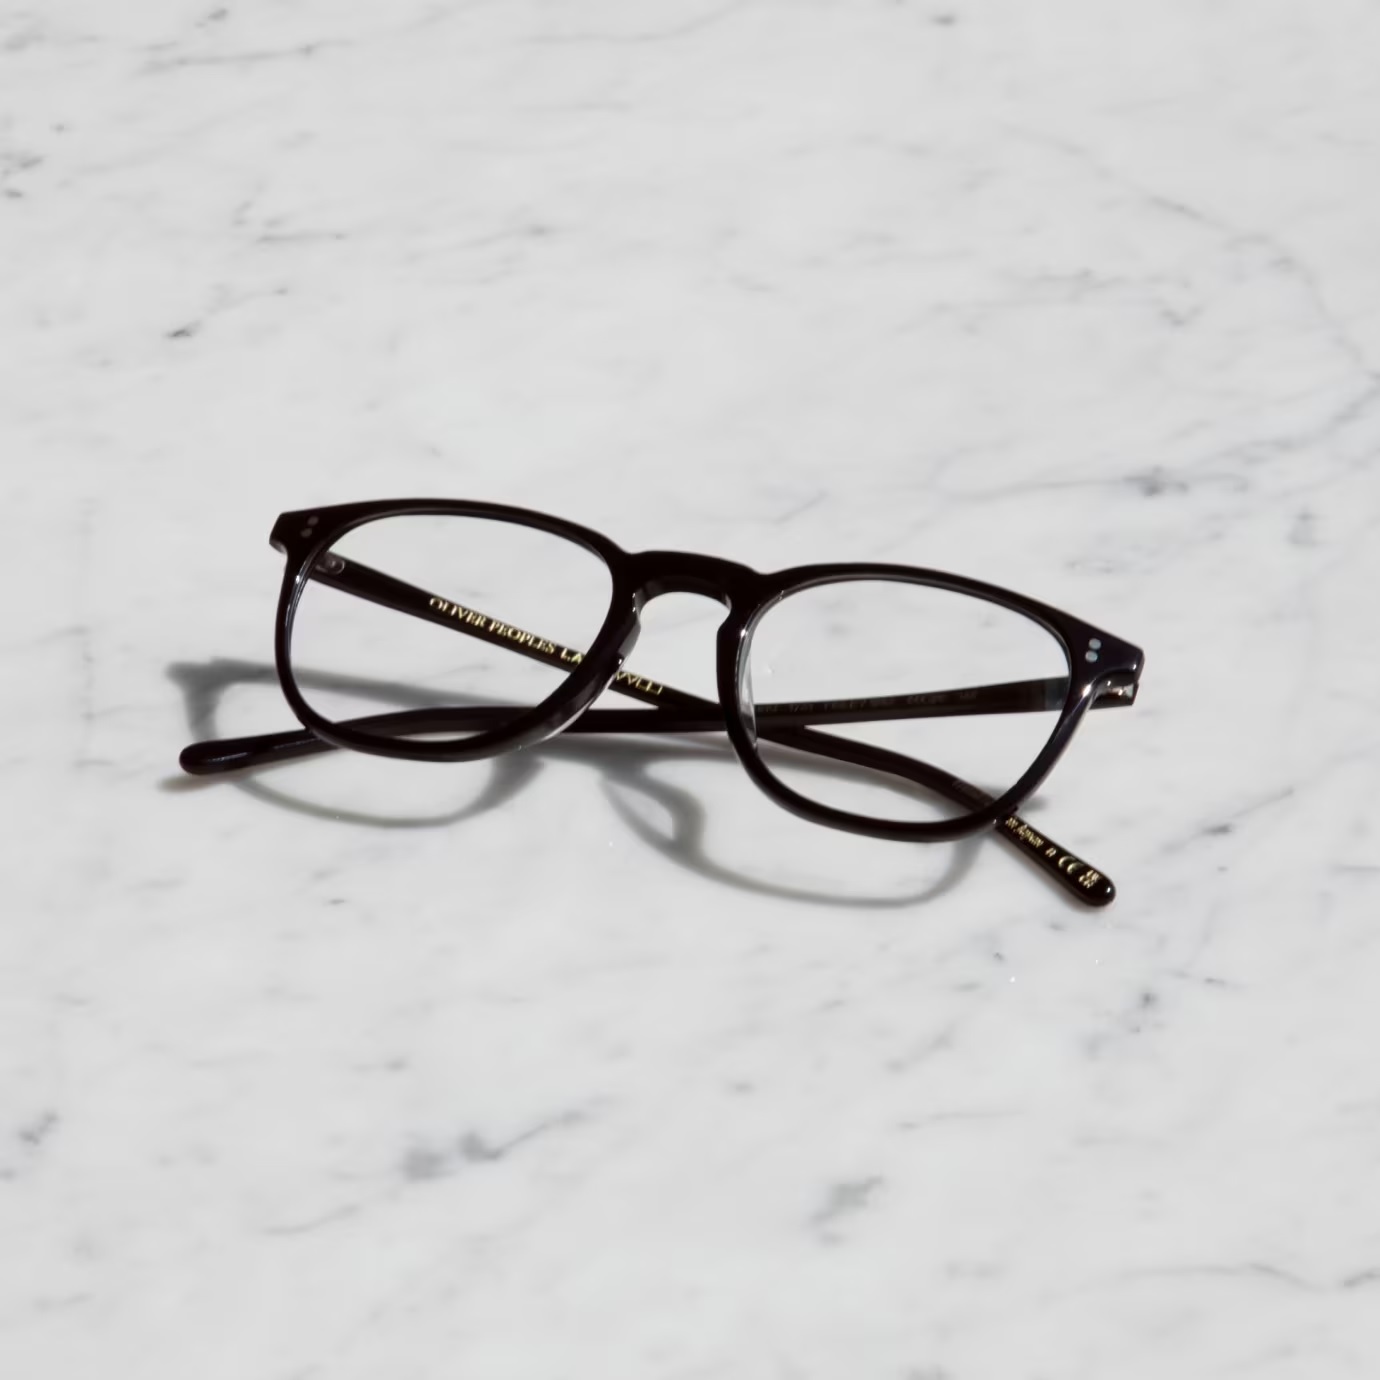 Handcrafted Acetate Construction: